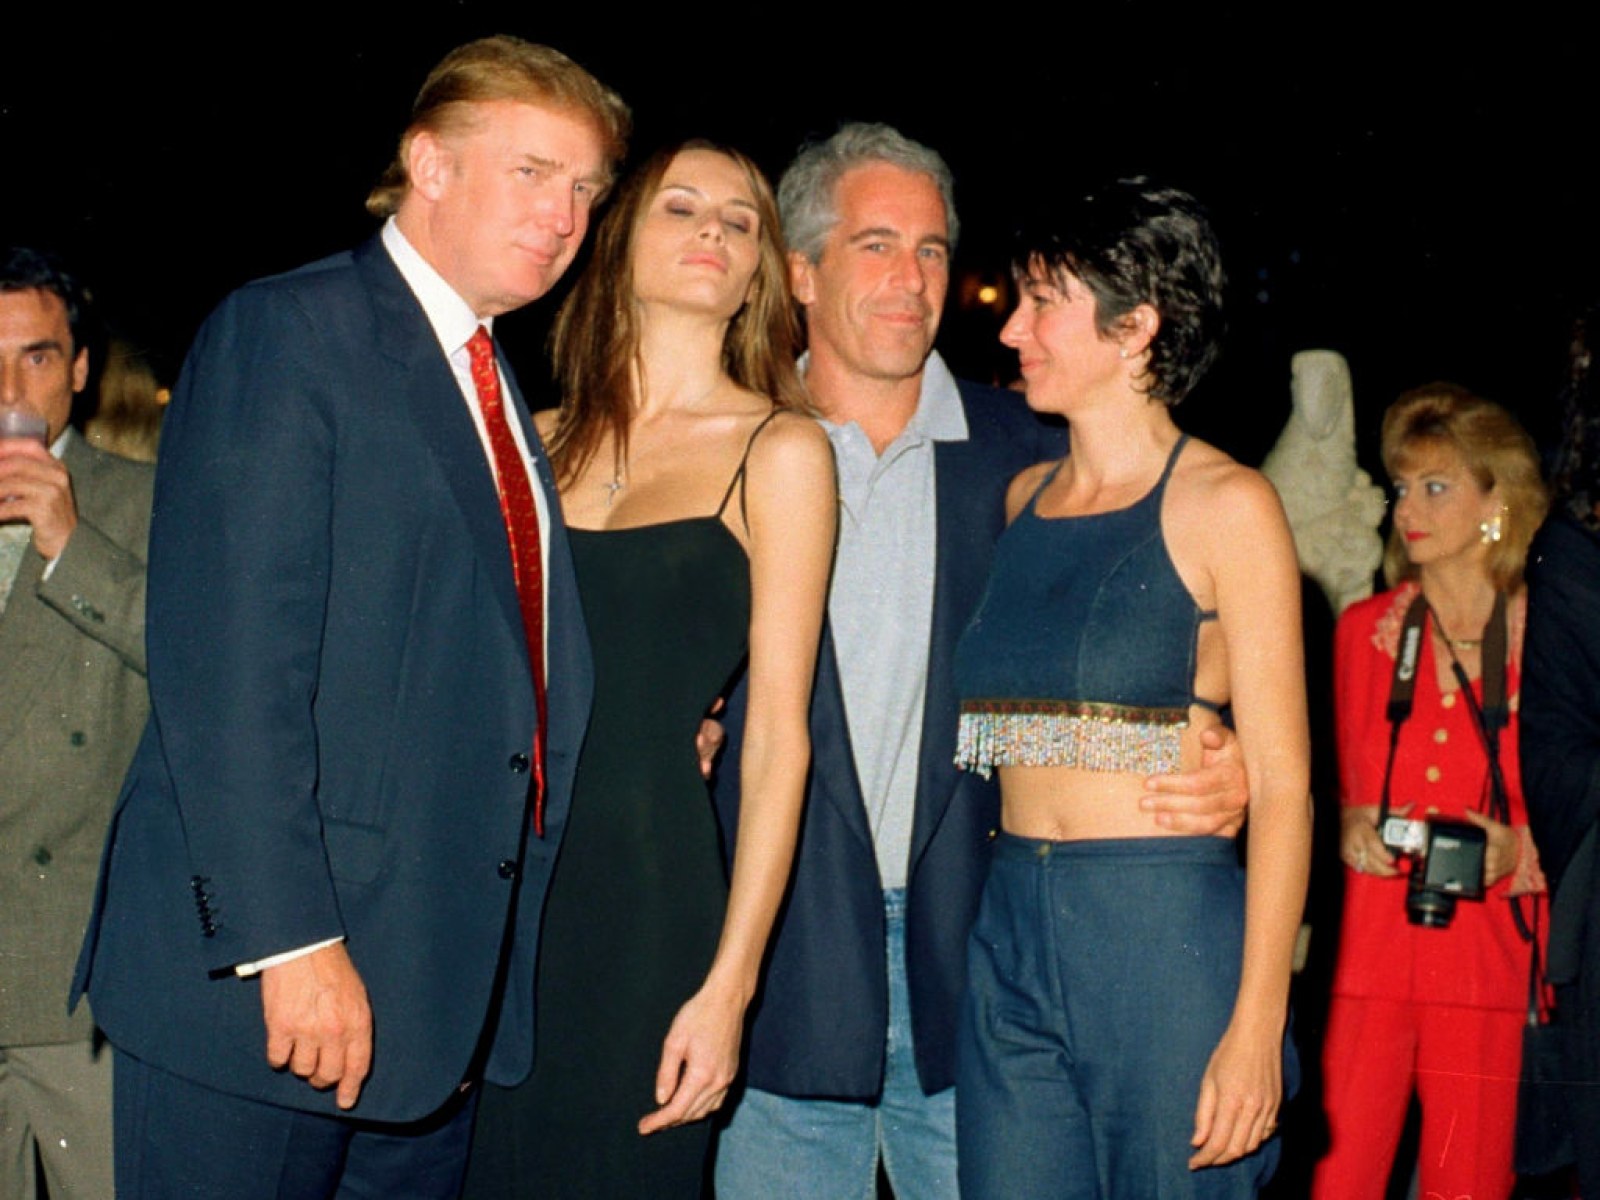 Old Man Young Girl - What Is The Lolita Express? Epstein's Infamous Sex Plane ...